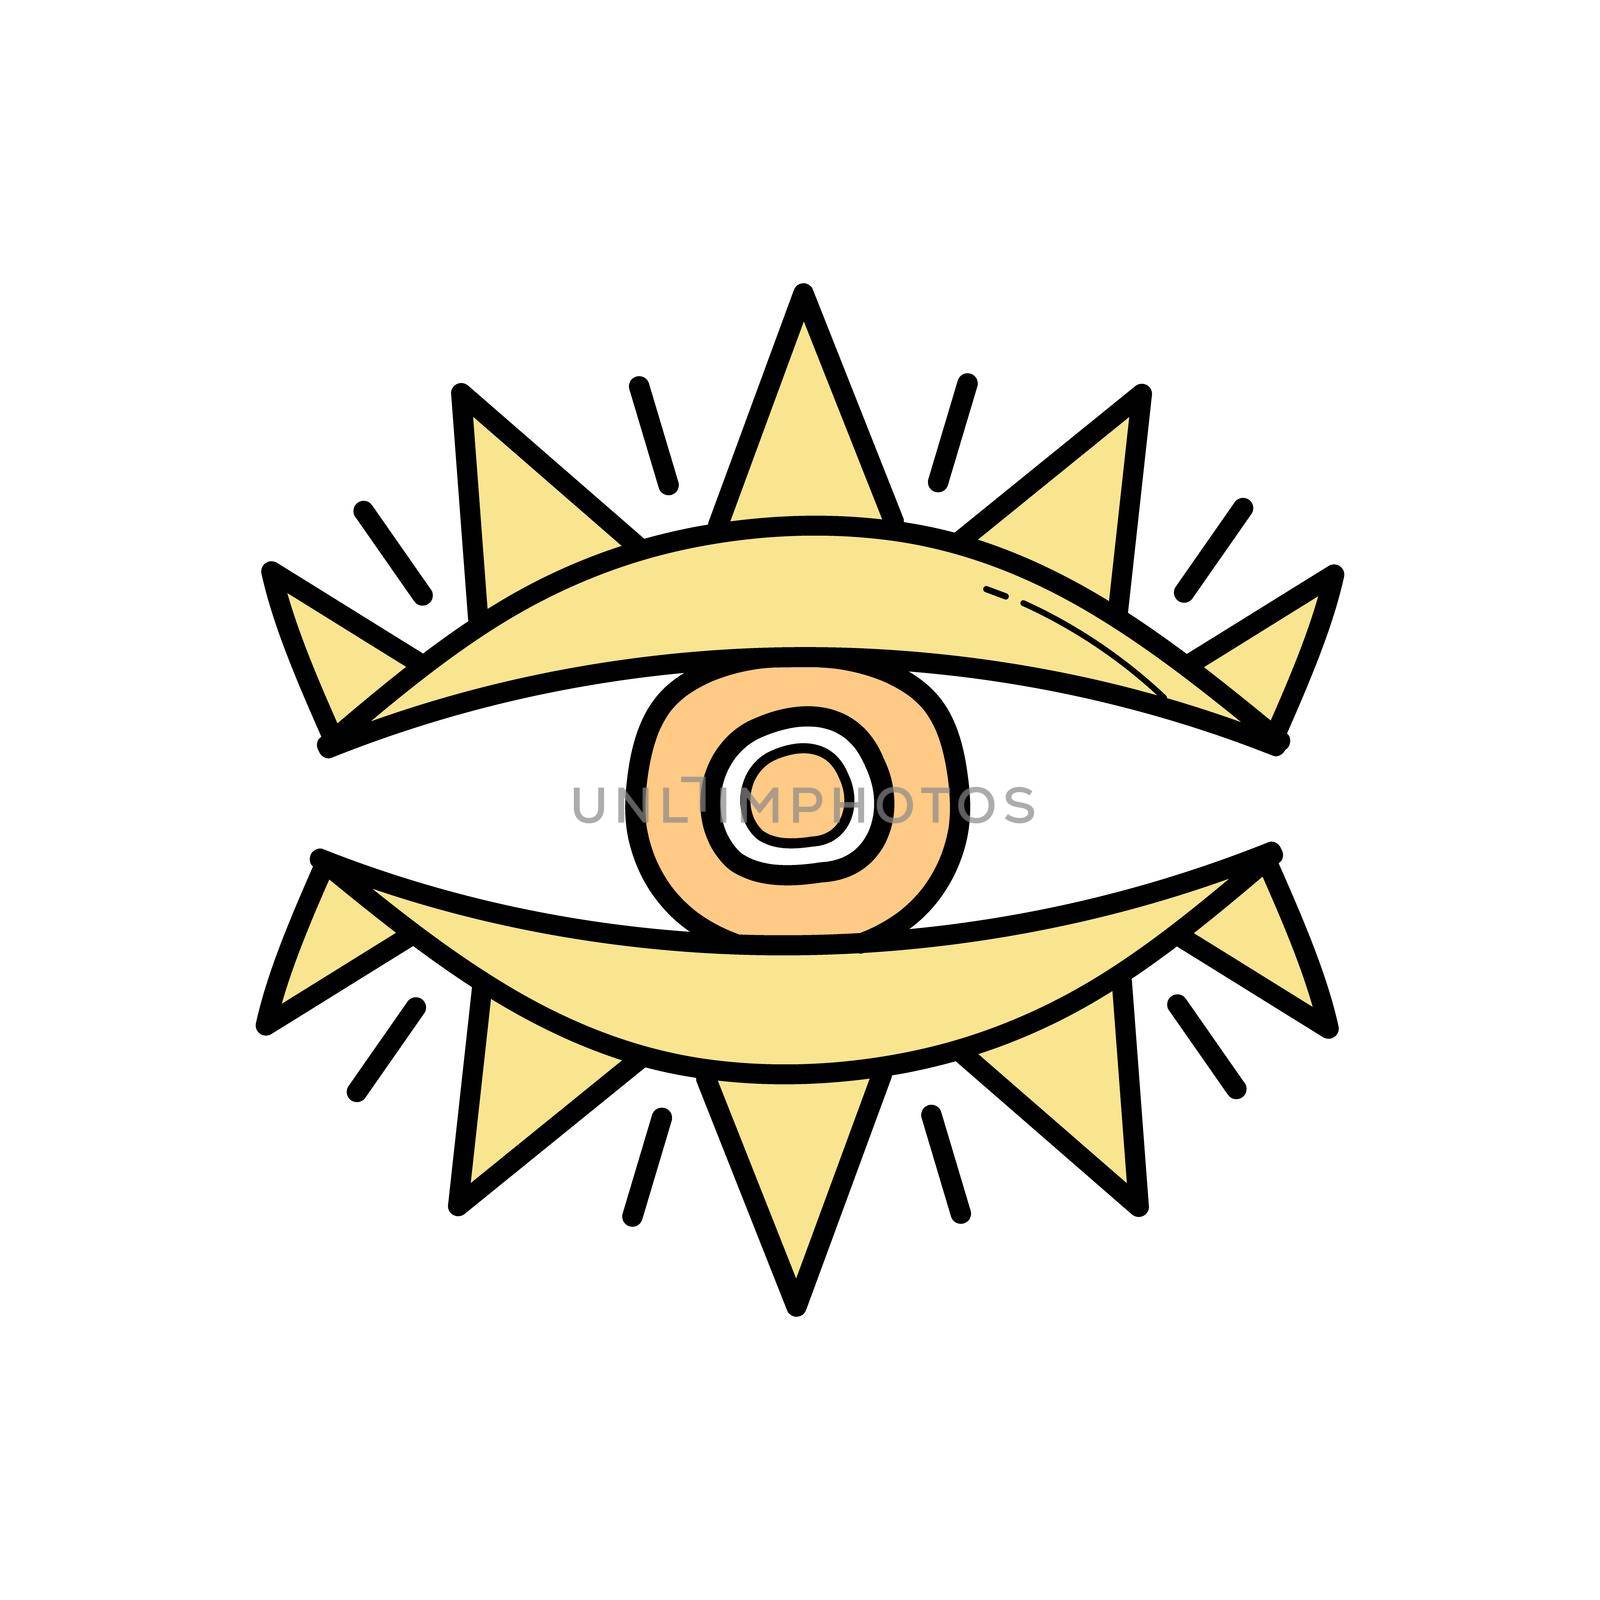 Eye mystic boho symbol. Abstract zen eye sign for design. Doodle simple icon by natali_brill